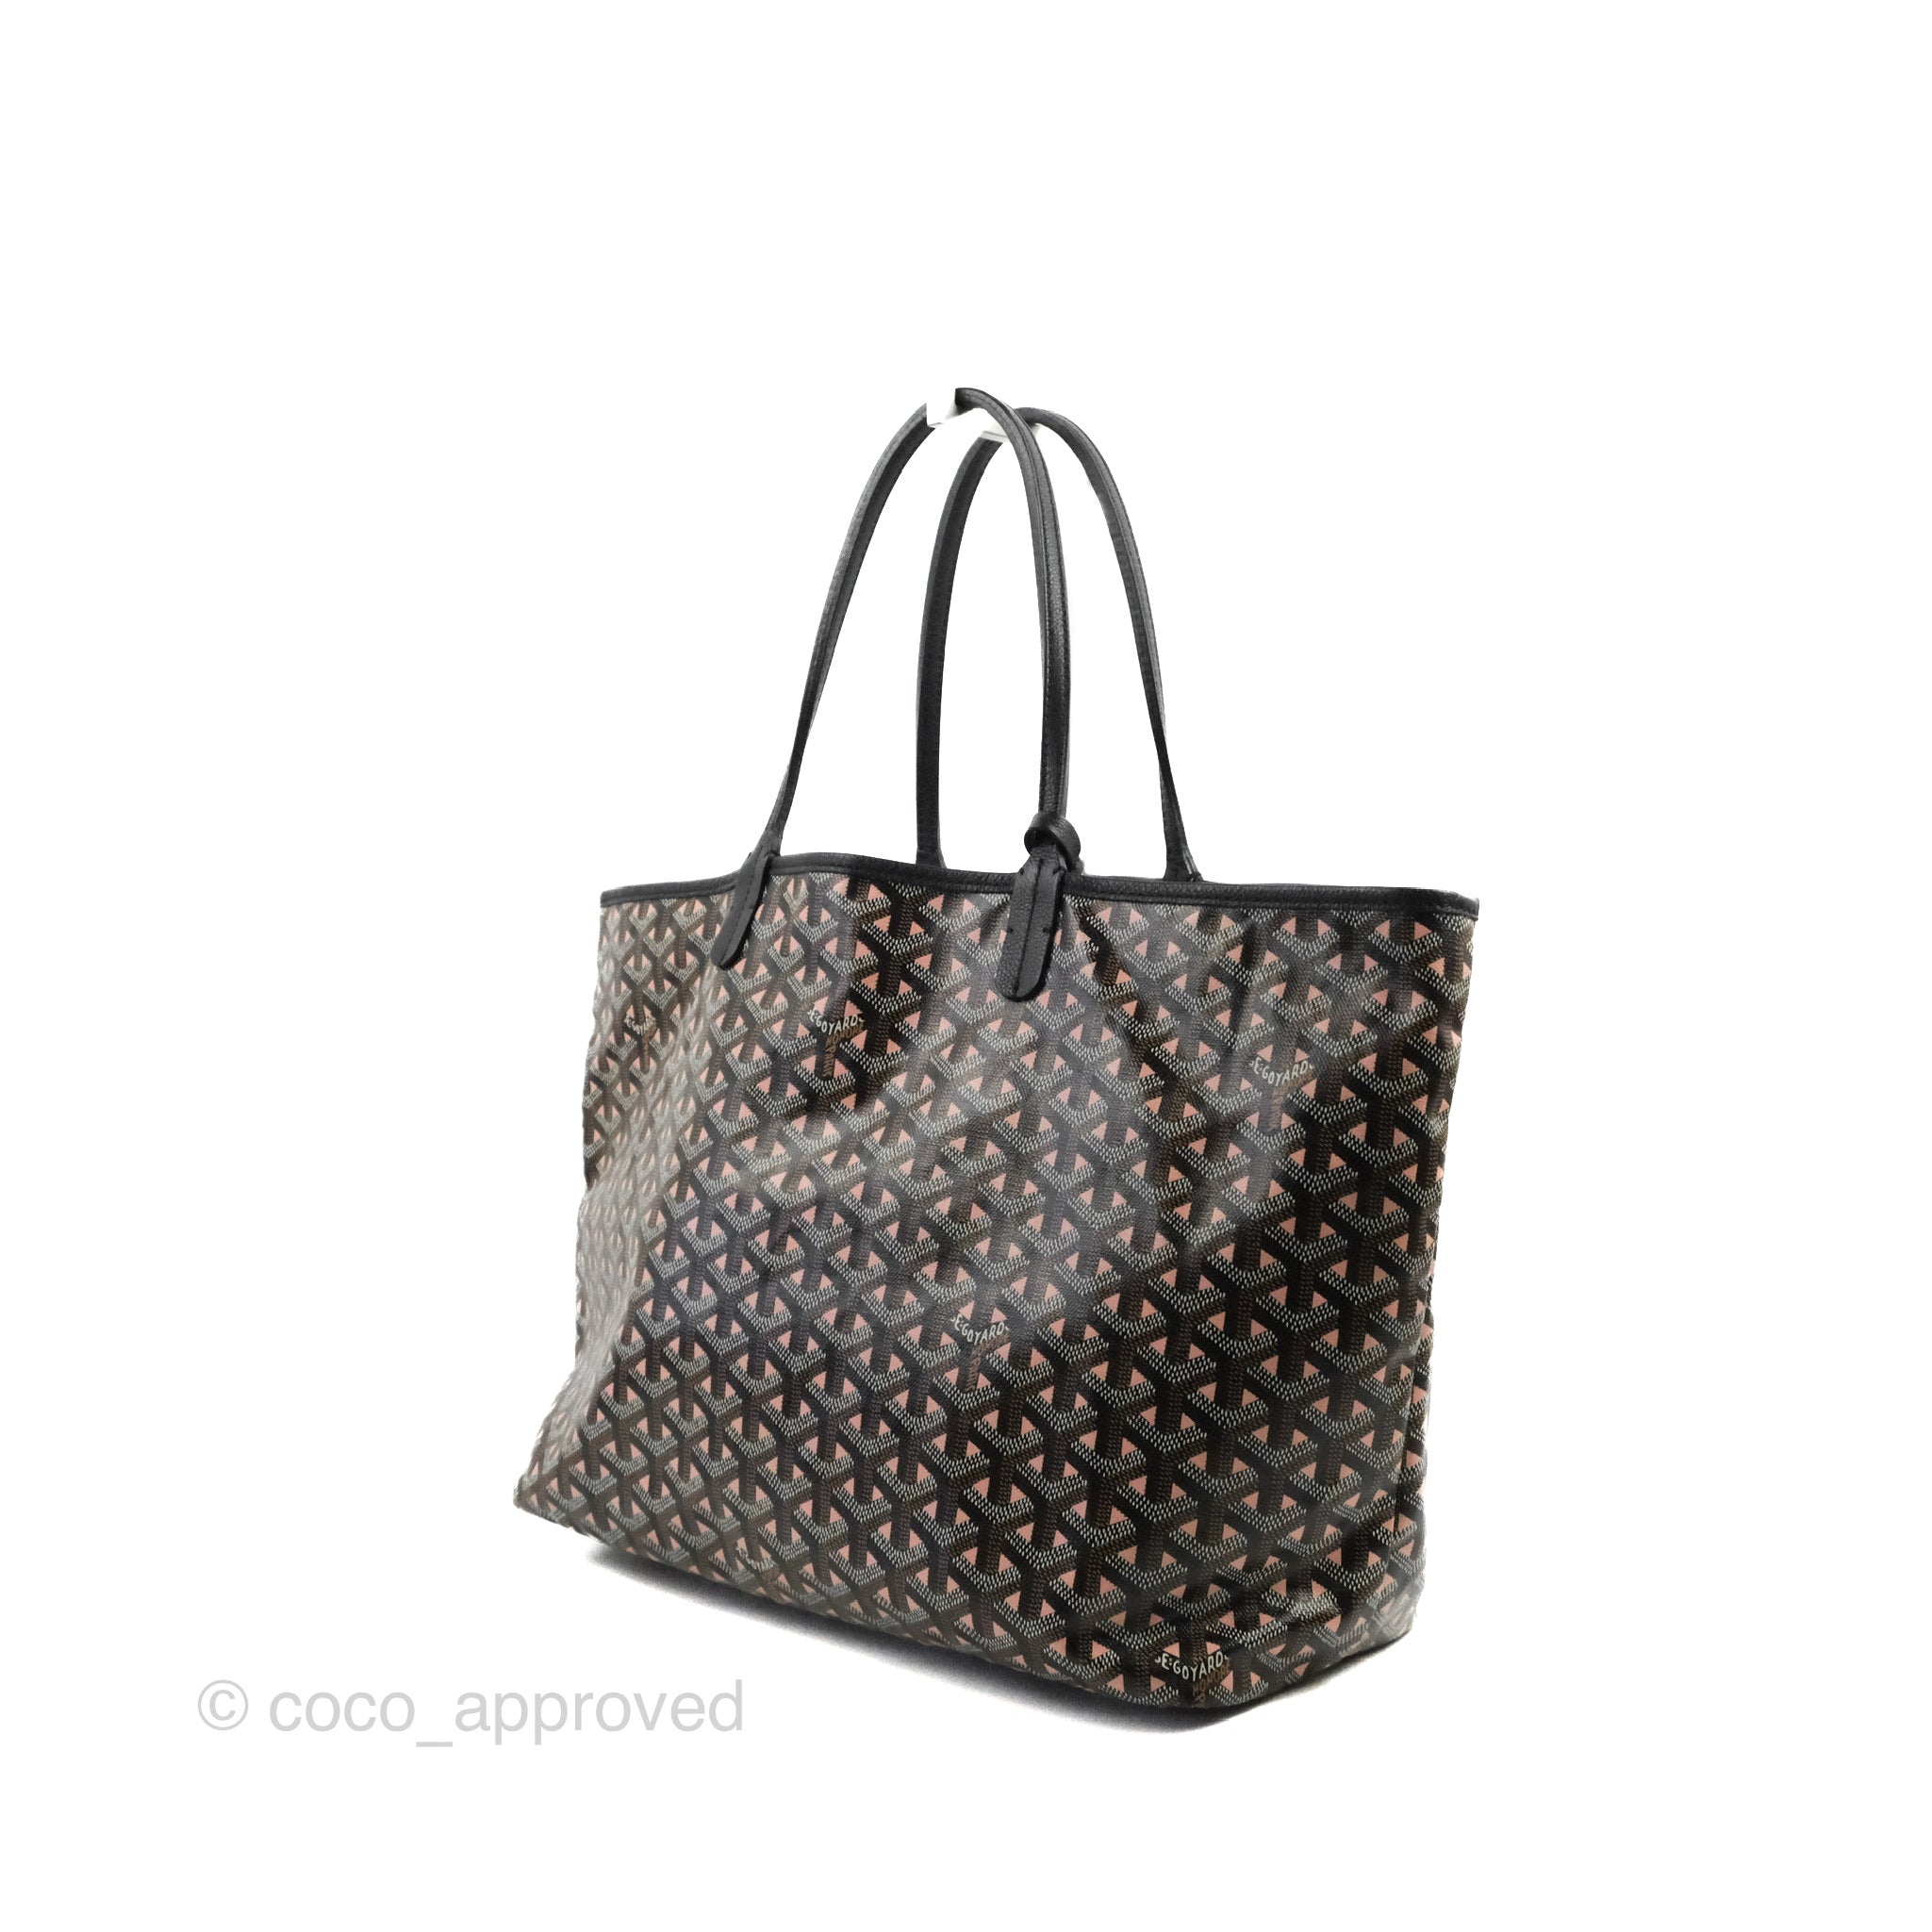 Goyard Large Tote Bags for Women, Authenticity Guaranteed